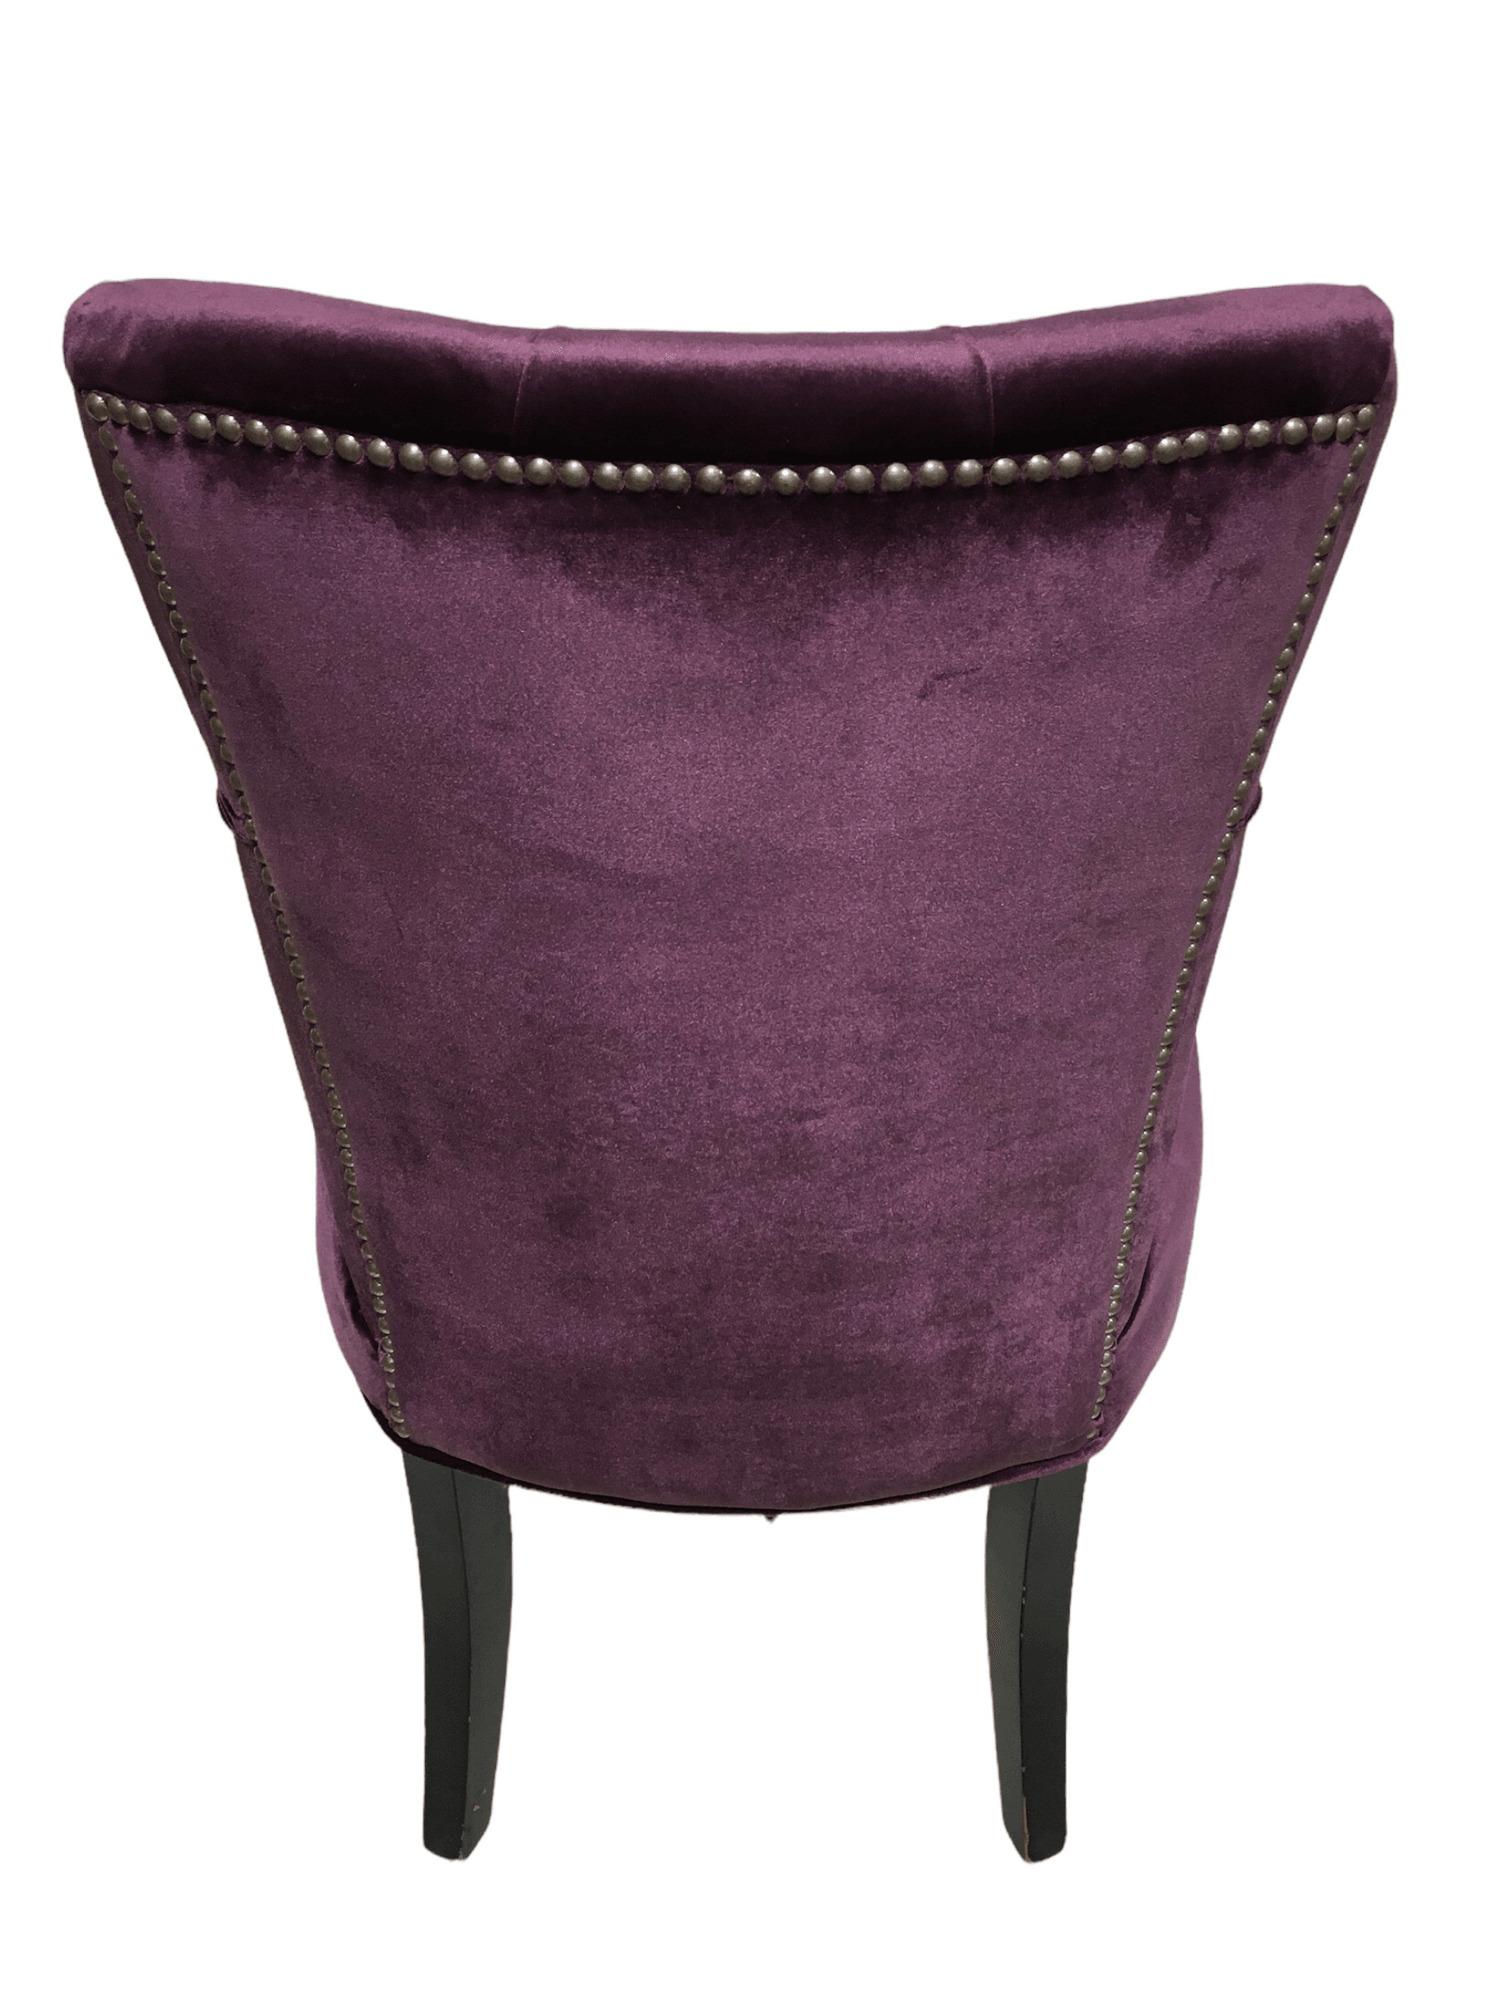 Vintage Purple Velvet Chairs with Tufted Padded Backrest. Set of 2 1